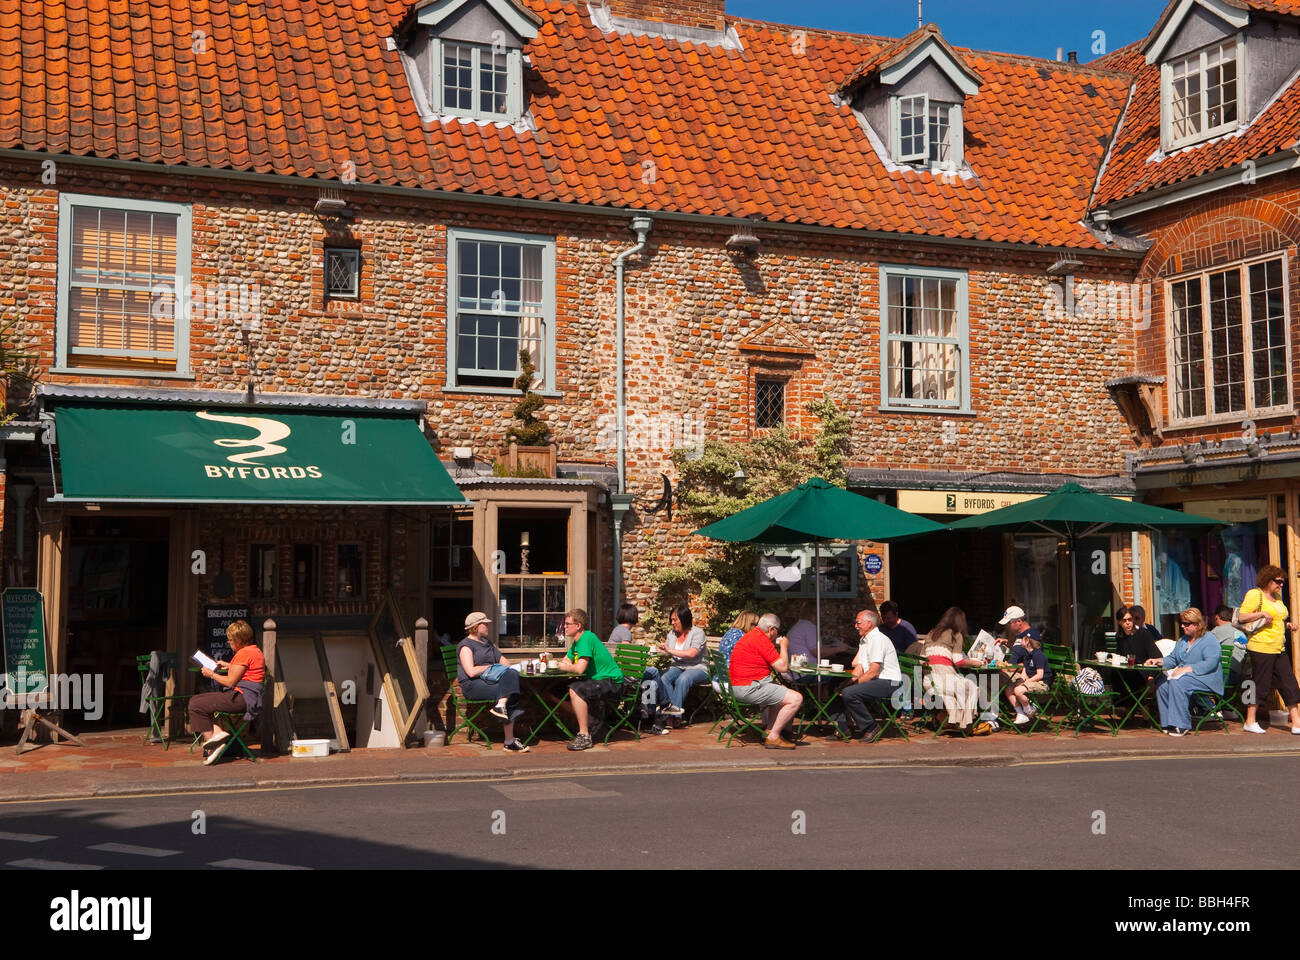 Customers sitting outside in the sun drinking tea and coffee at the Byfords delicatessen restaurant cafe in Holt Norfolk Uk Stock Photo